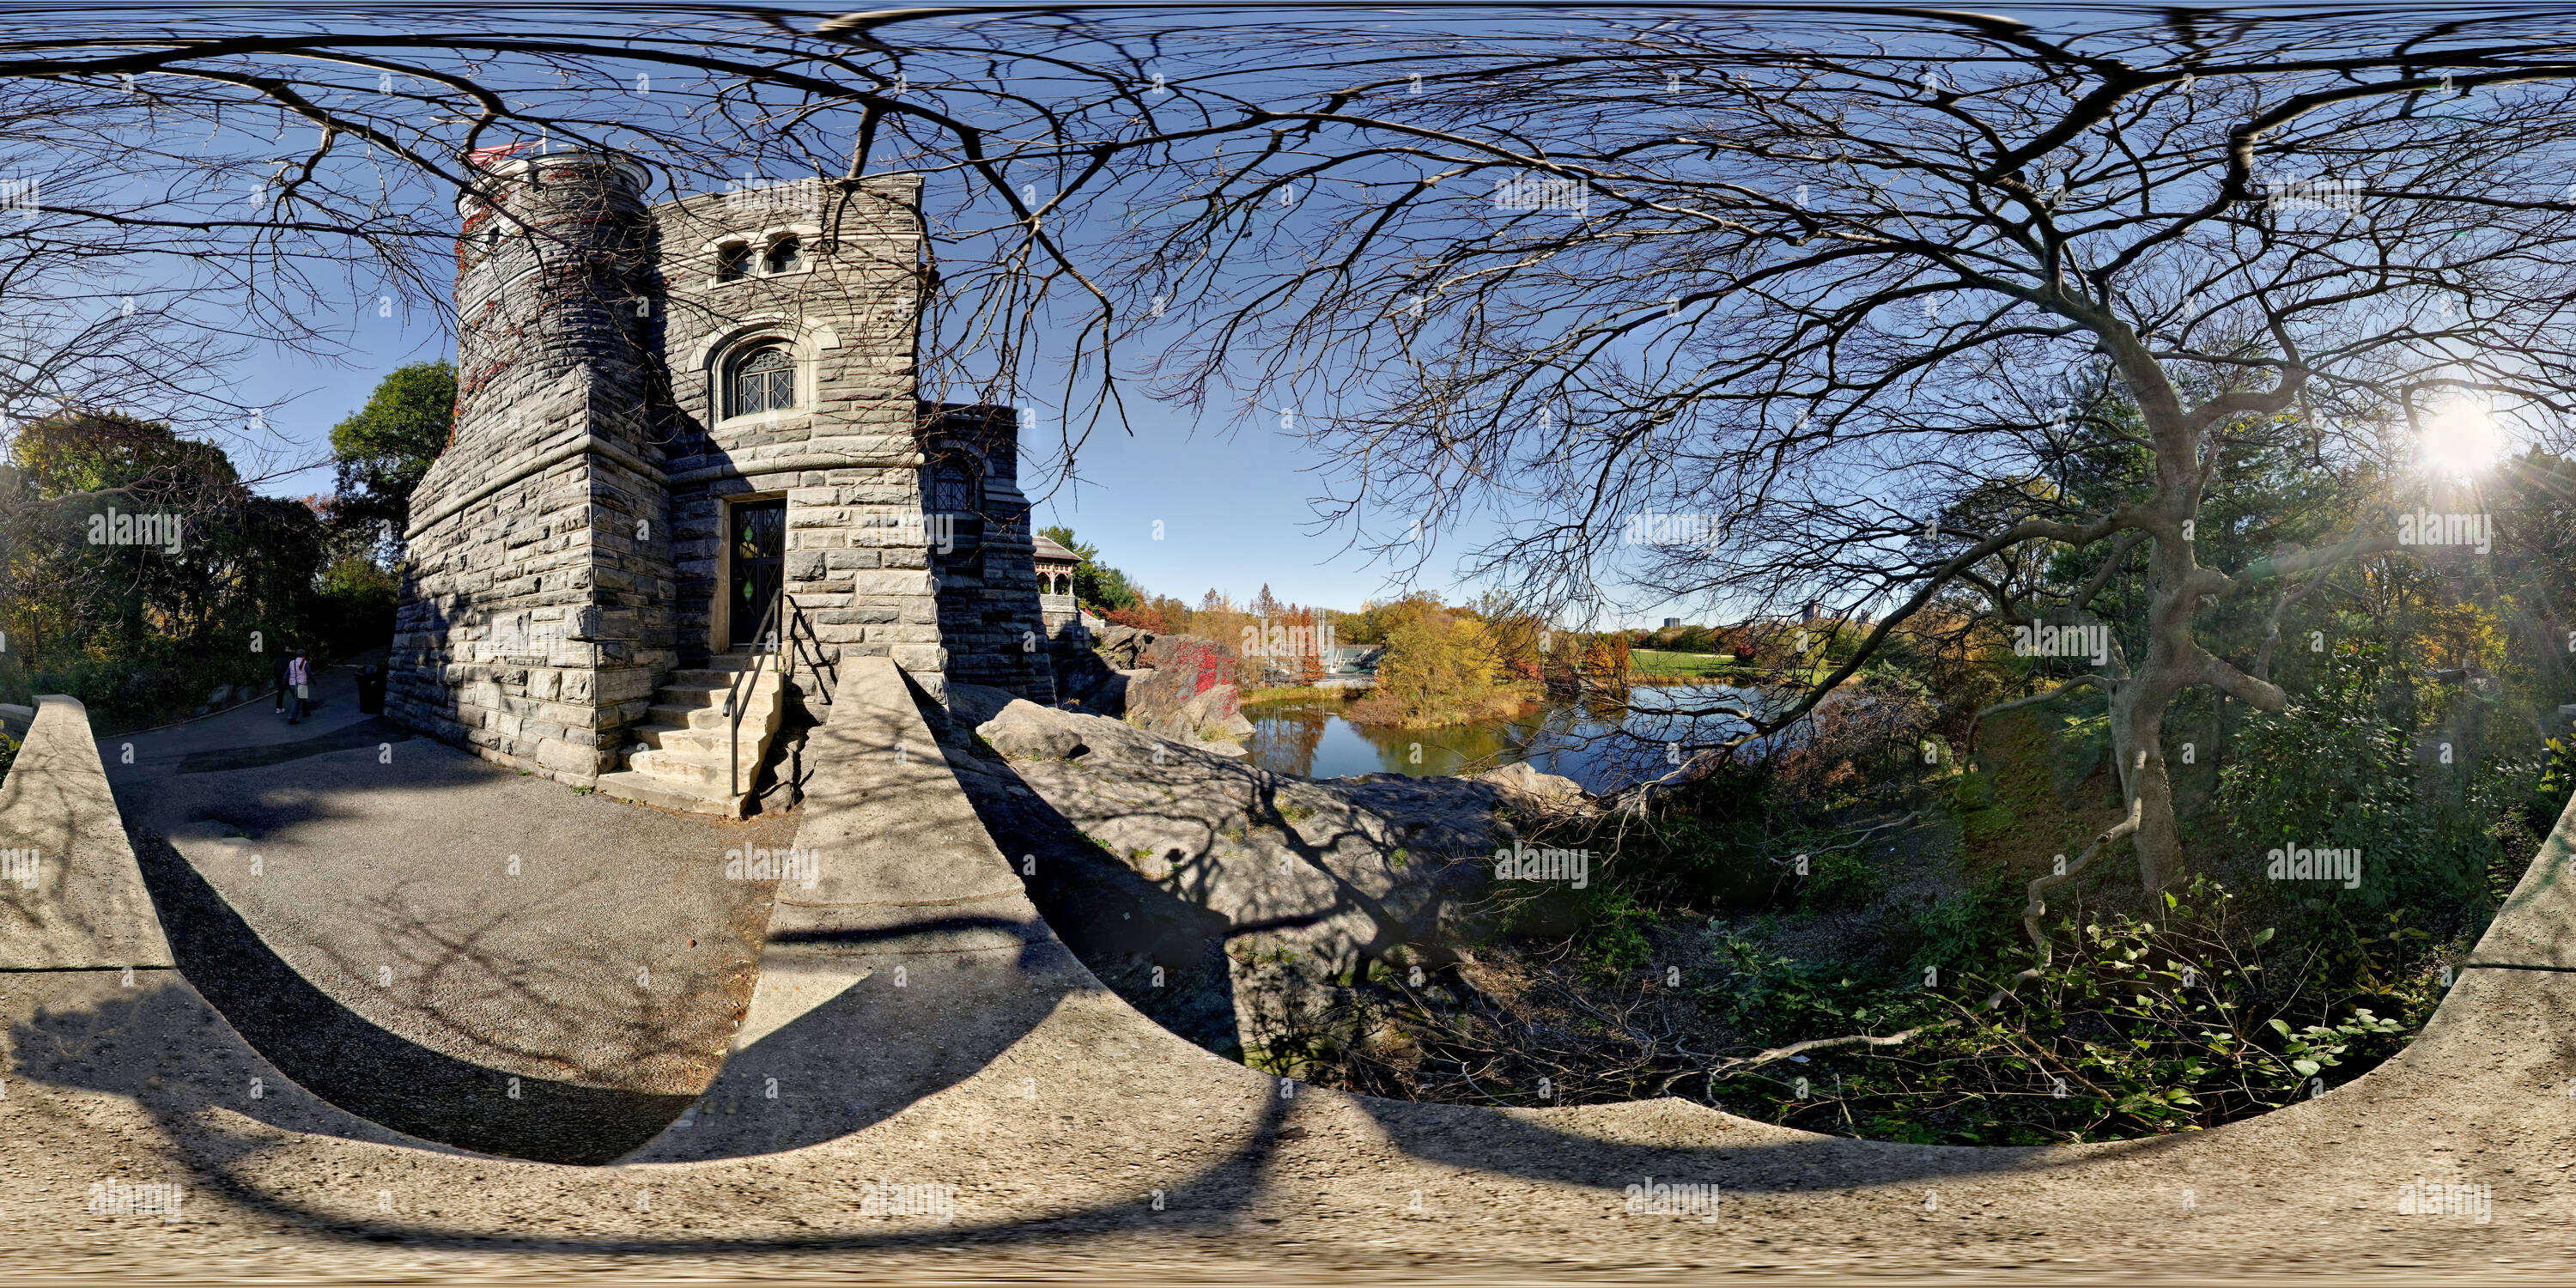 360 degree panoramic view of Belvedere Castle, Central Park, New York City